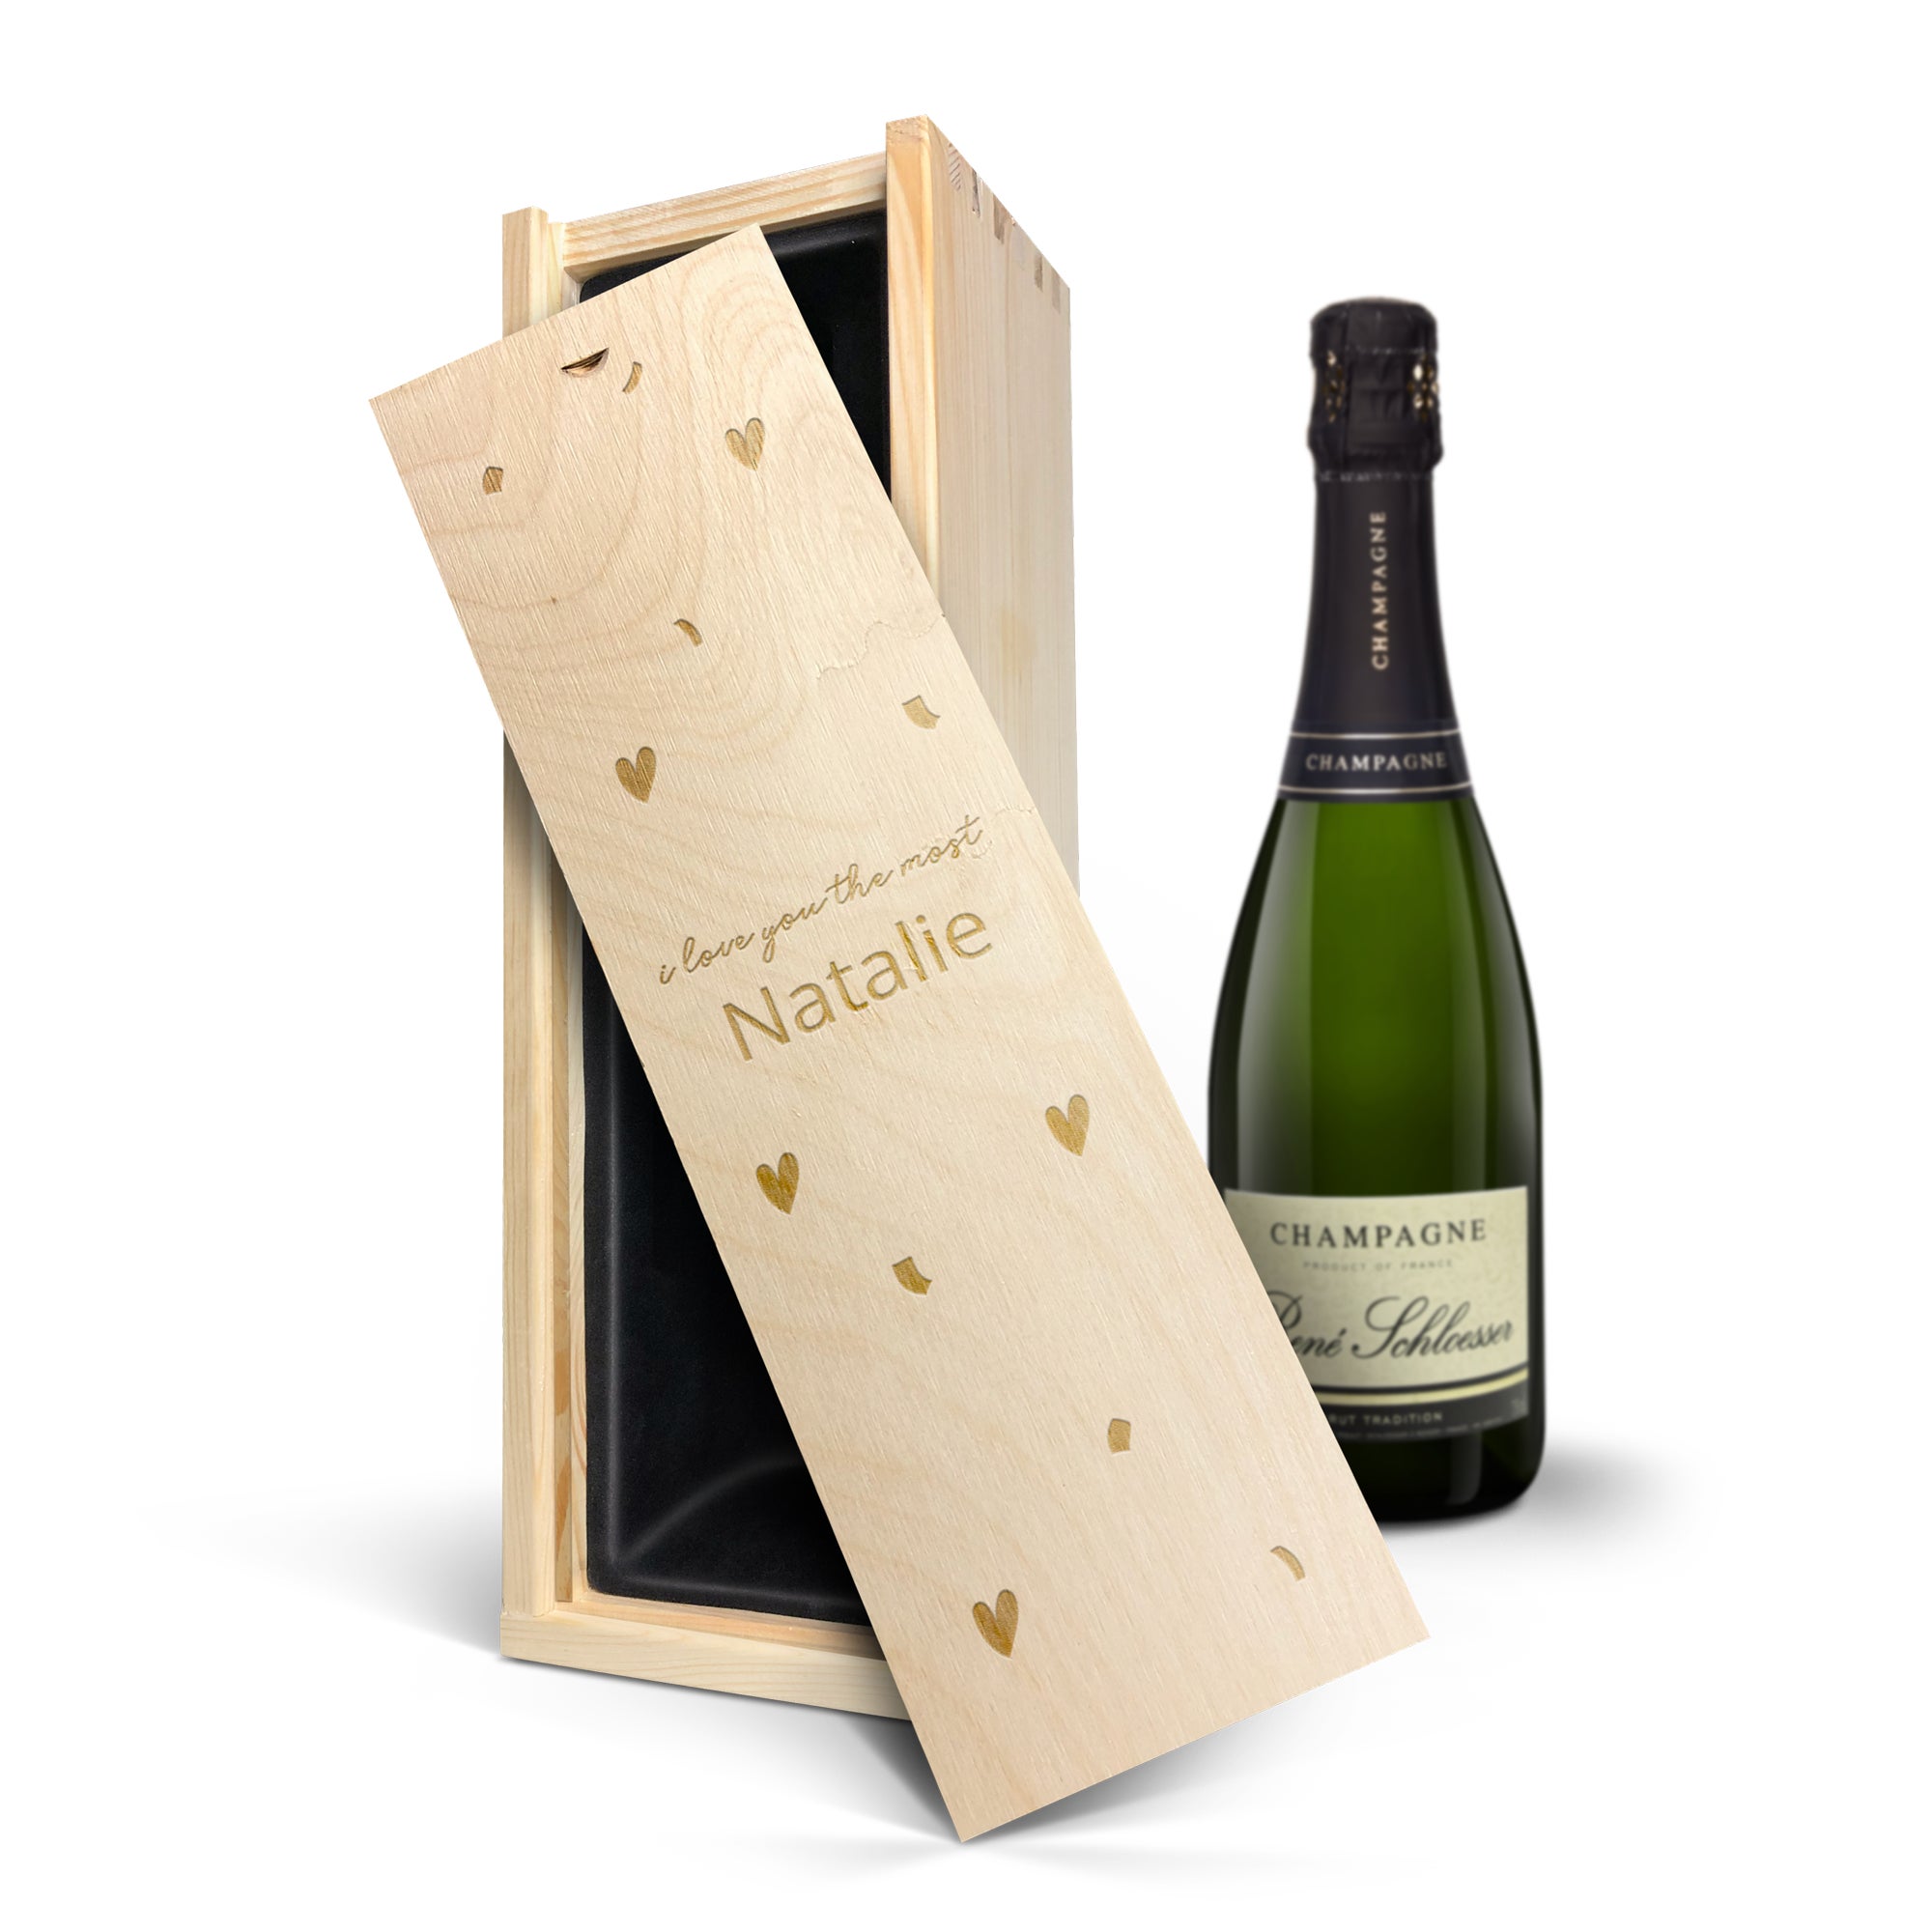 Personalised champagne gift - Rene Schloesser (750ml) - Engraved wooden case